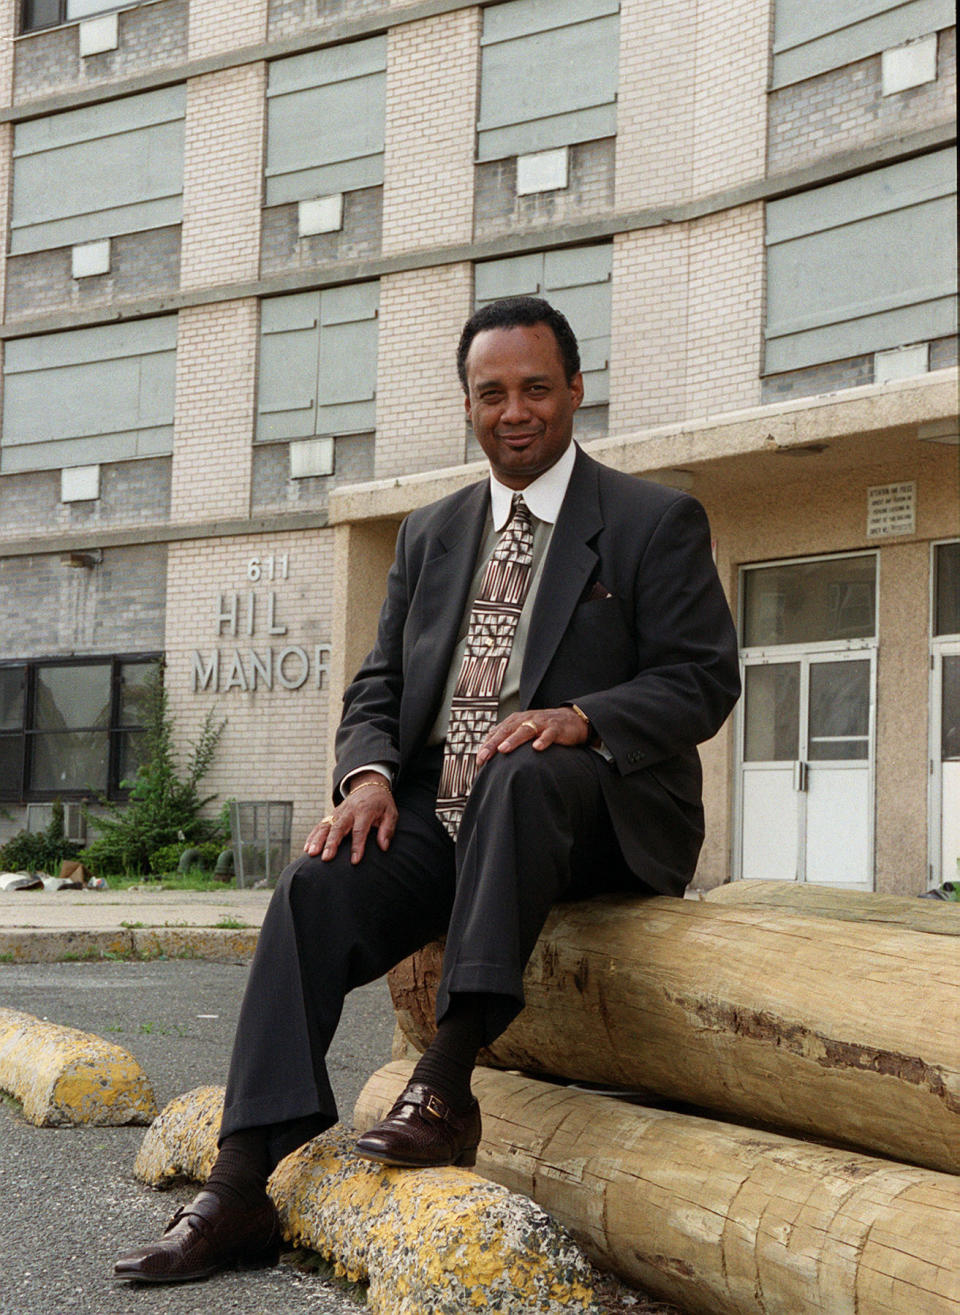 In this May 15, 1999 photo, Donald Bernard Sr., chairman of the African American Heritage Parade, poses outside of the defunct Hill Manor where he once lived in Newark, N.J. As a Democratic presidential candidate, Booker has leaned heavily on his record as Newark mayor. But the watershed scandal still burns some of his critics in New Jersey. Bernard Sr., pleaded guilty to accepting $957,000 from contractors for help getting them work. (Samir Id-Deen/NJ Advance Media via AP)